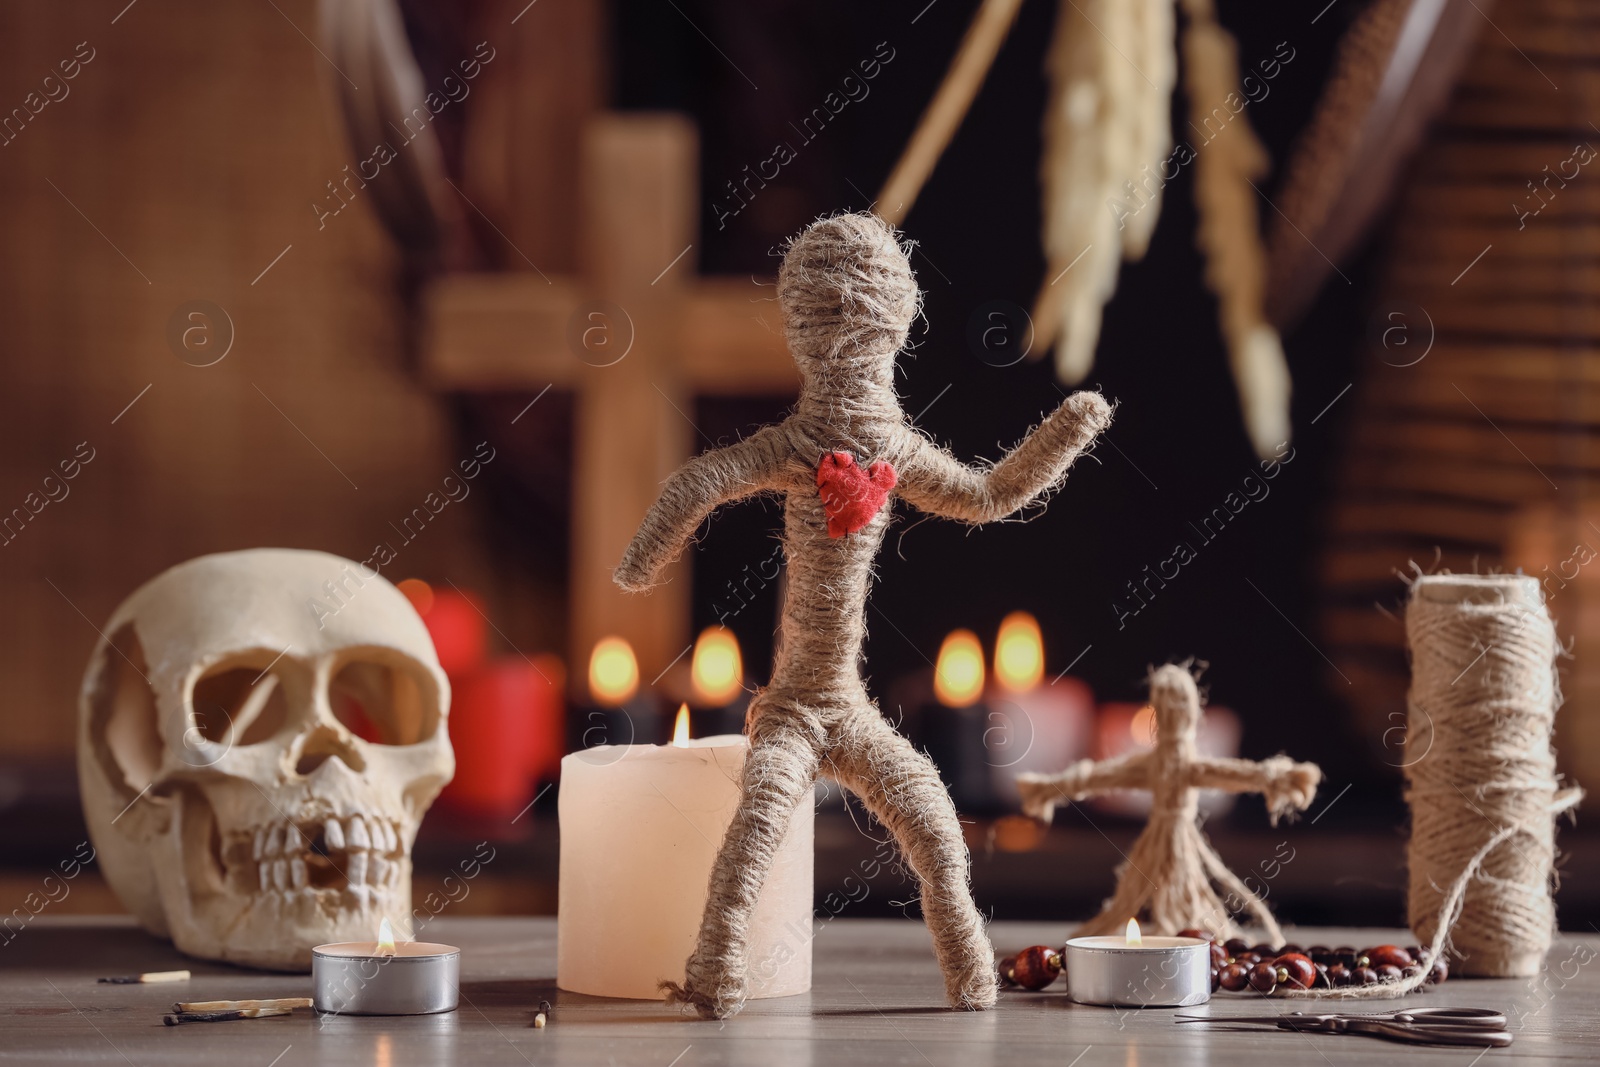 Photo of Voodoo doll with heart and ceremonial items on wooden table